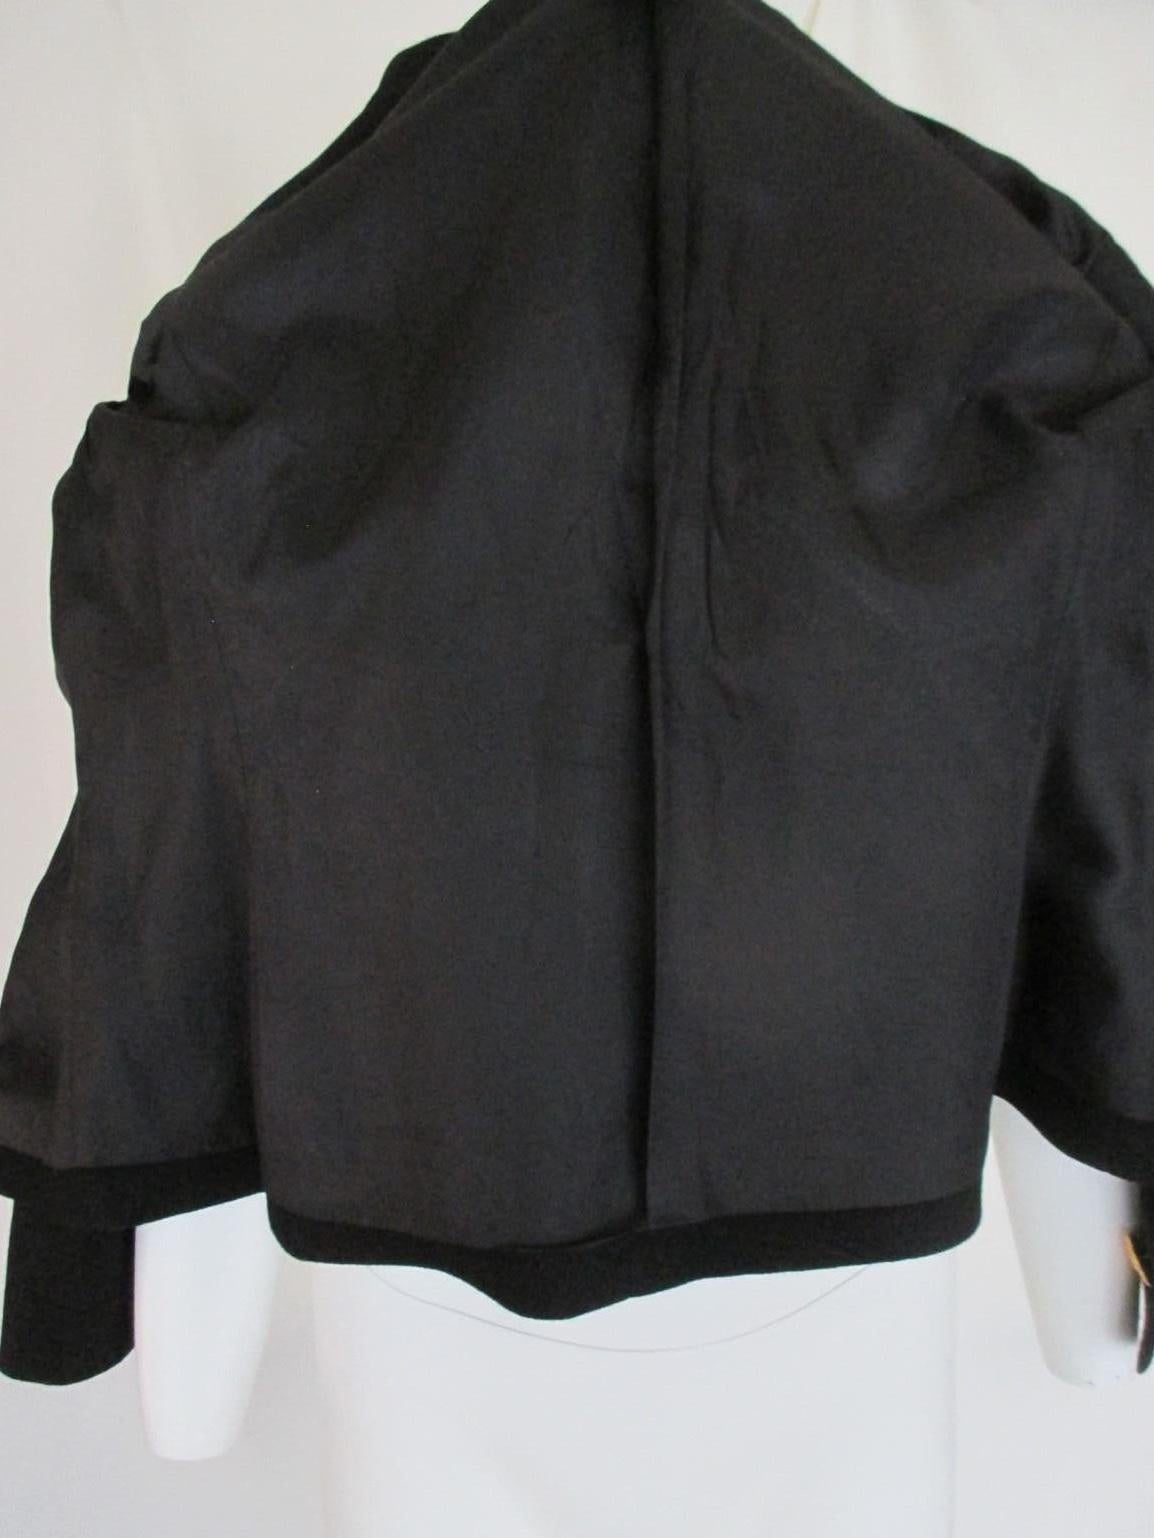 Yves Saint Laurent Gold Sun Buttons Black Jacket In Good Condition For Sale In Amsterdam, NL